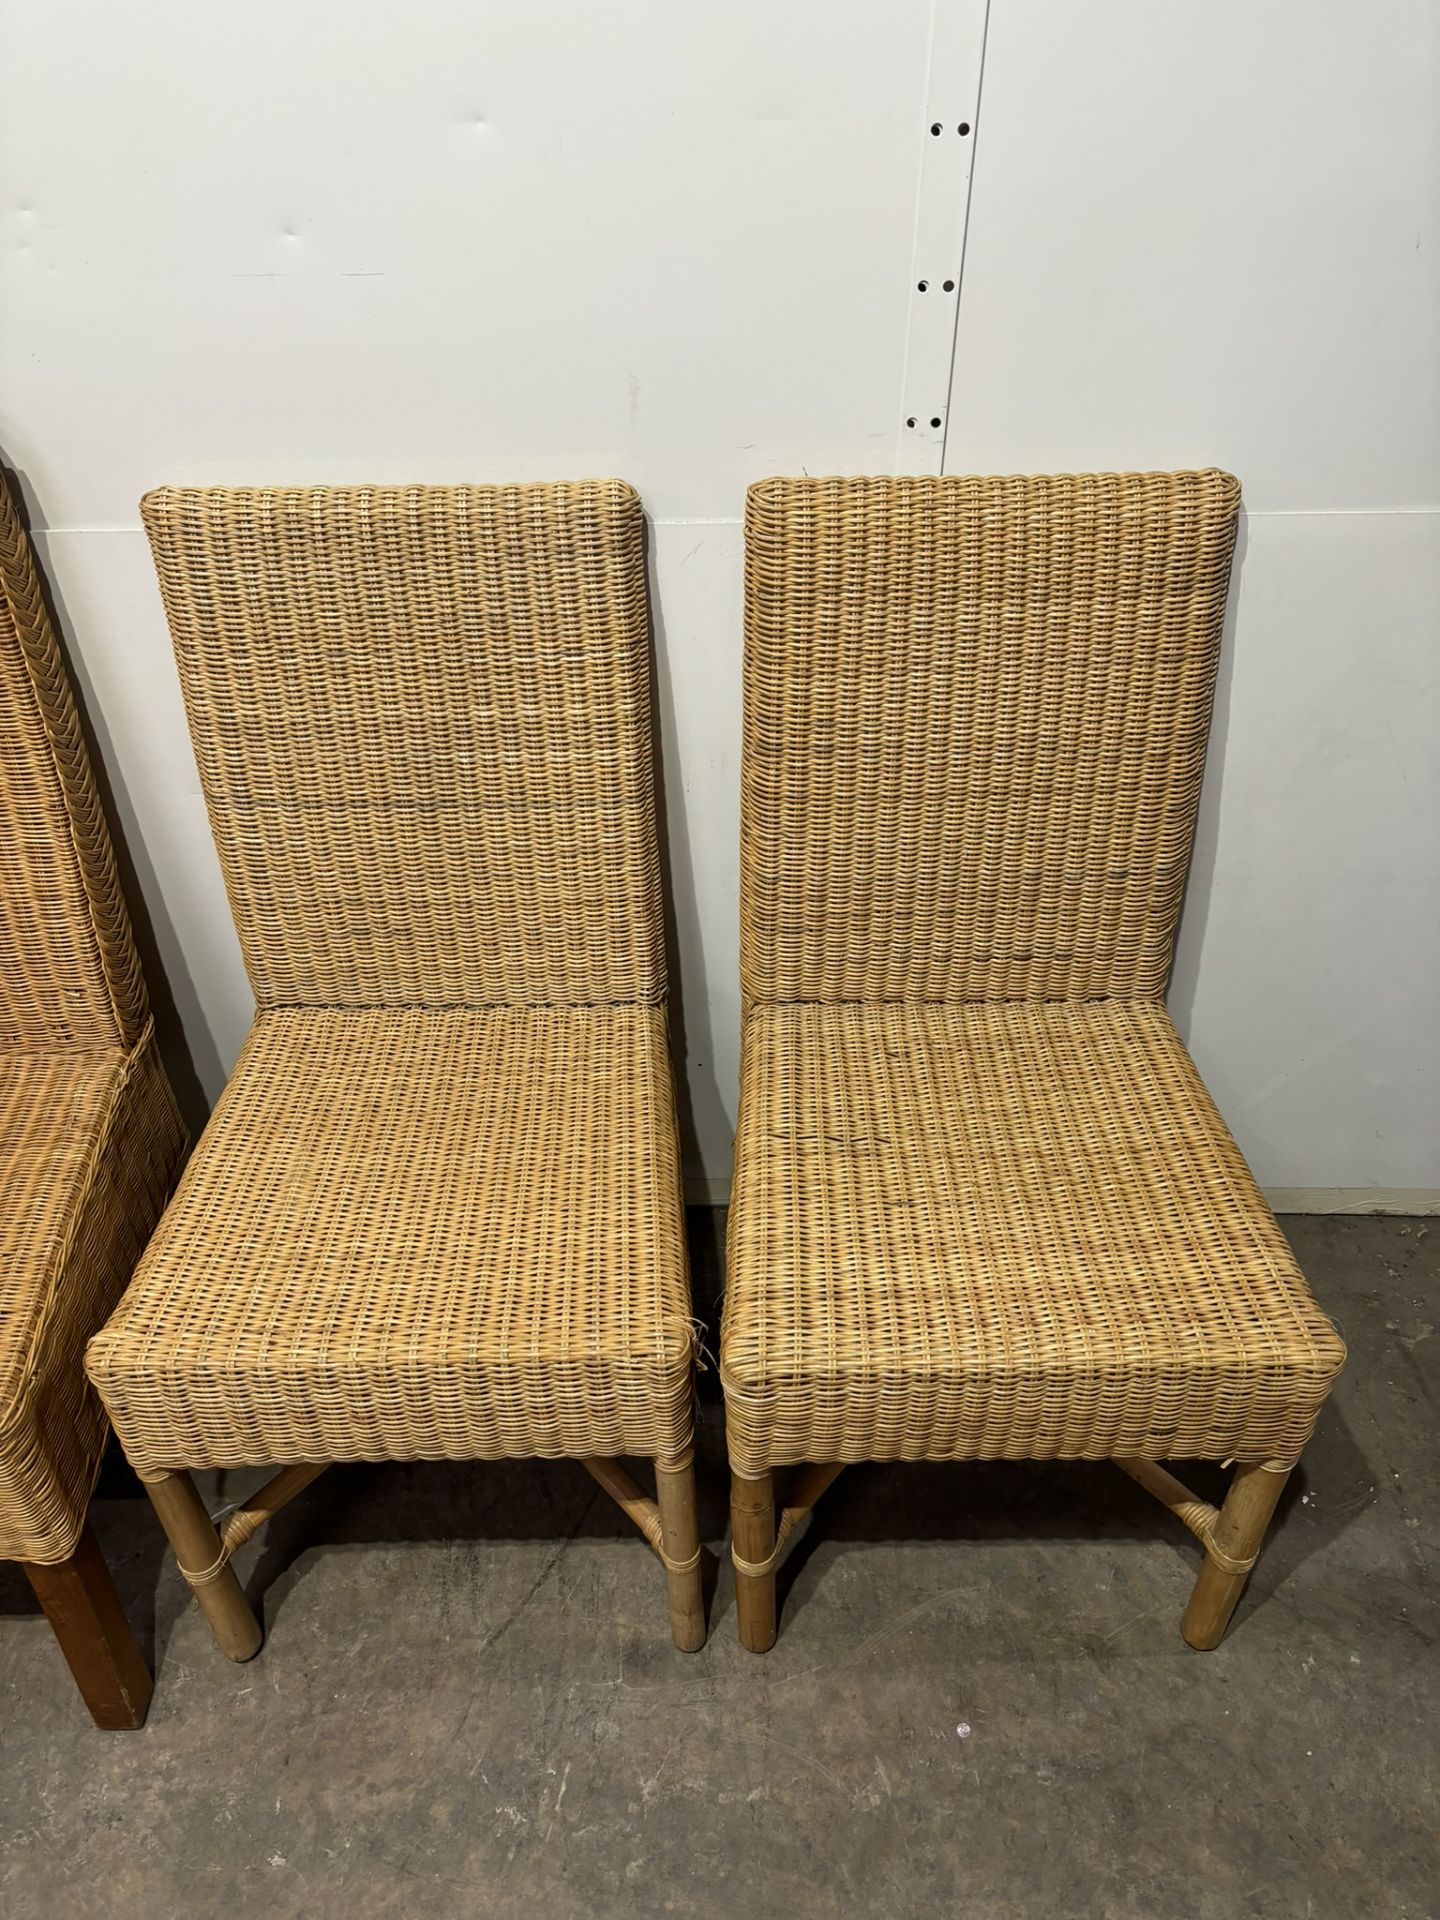 4 x Various Wicker Side Chairs As Seen In Photos - Image 3 of 3